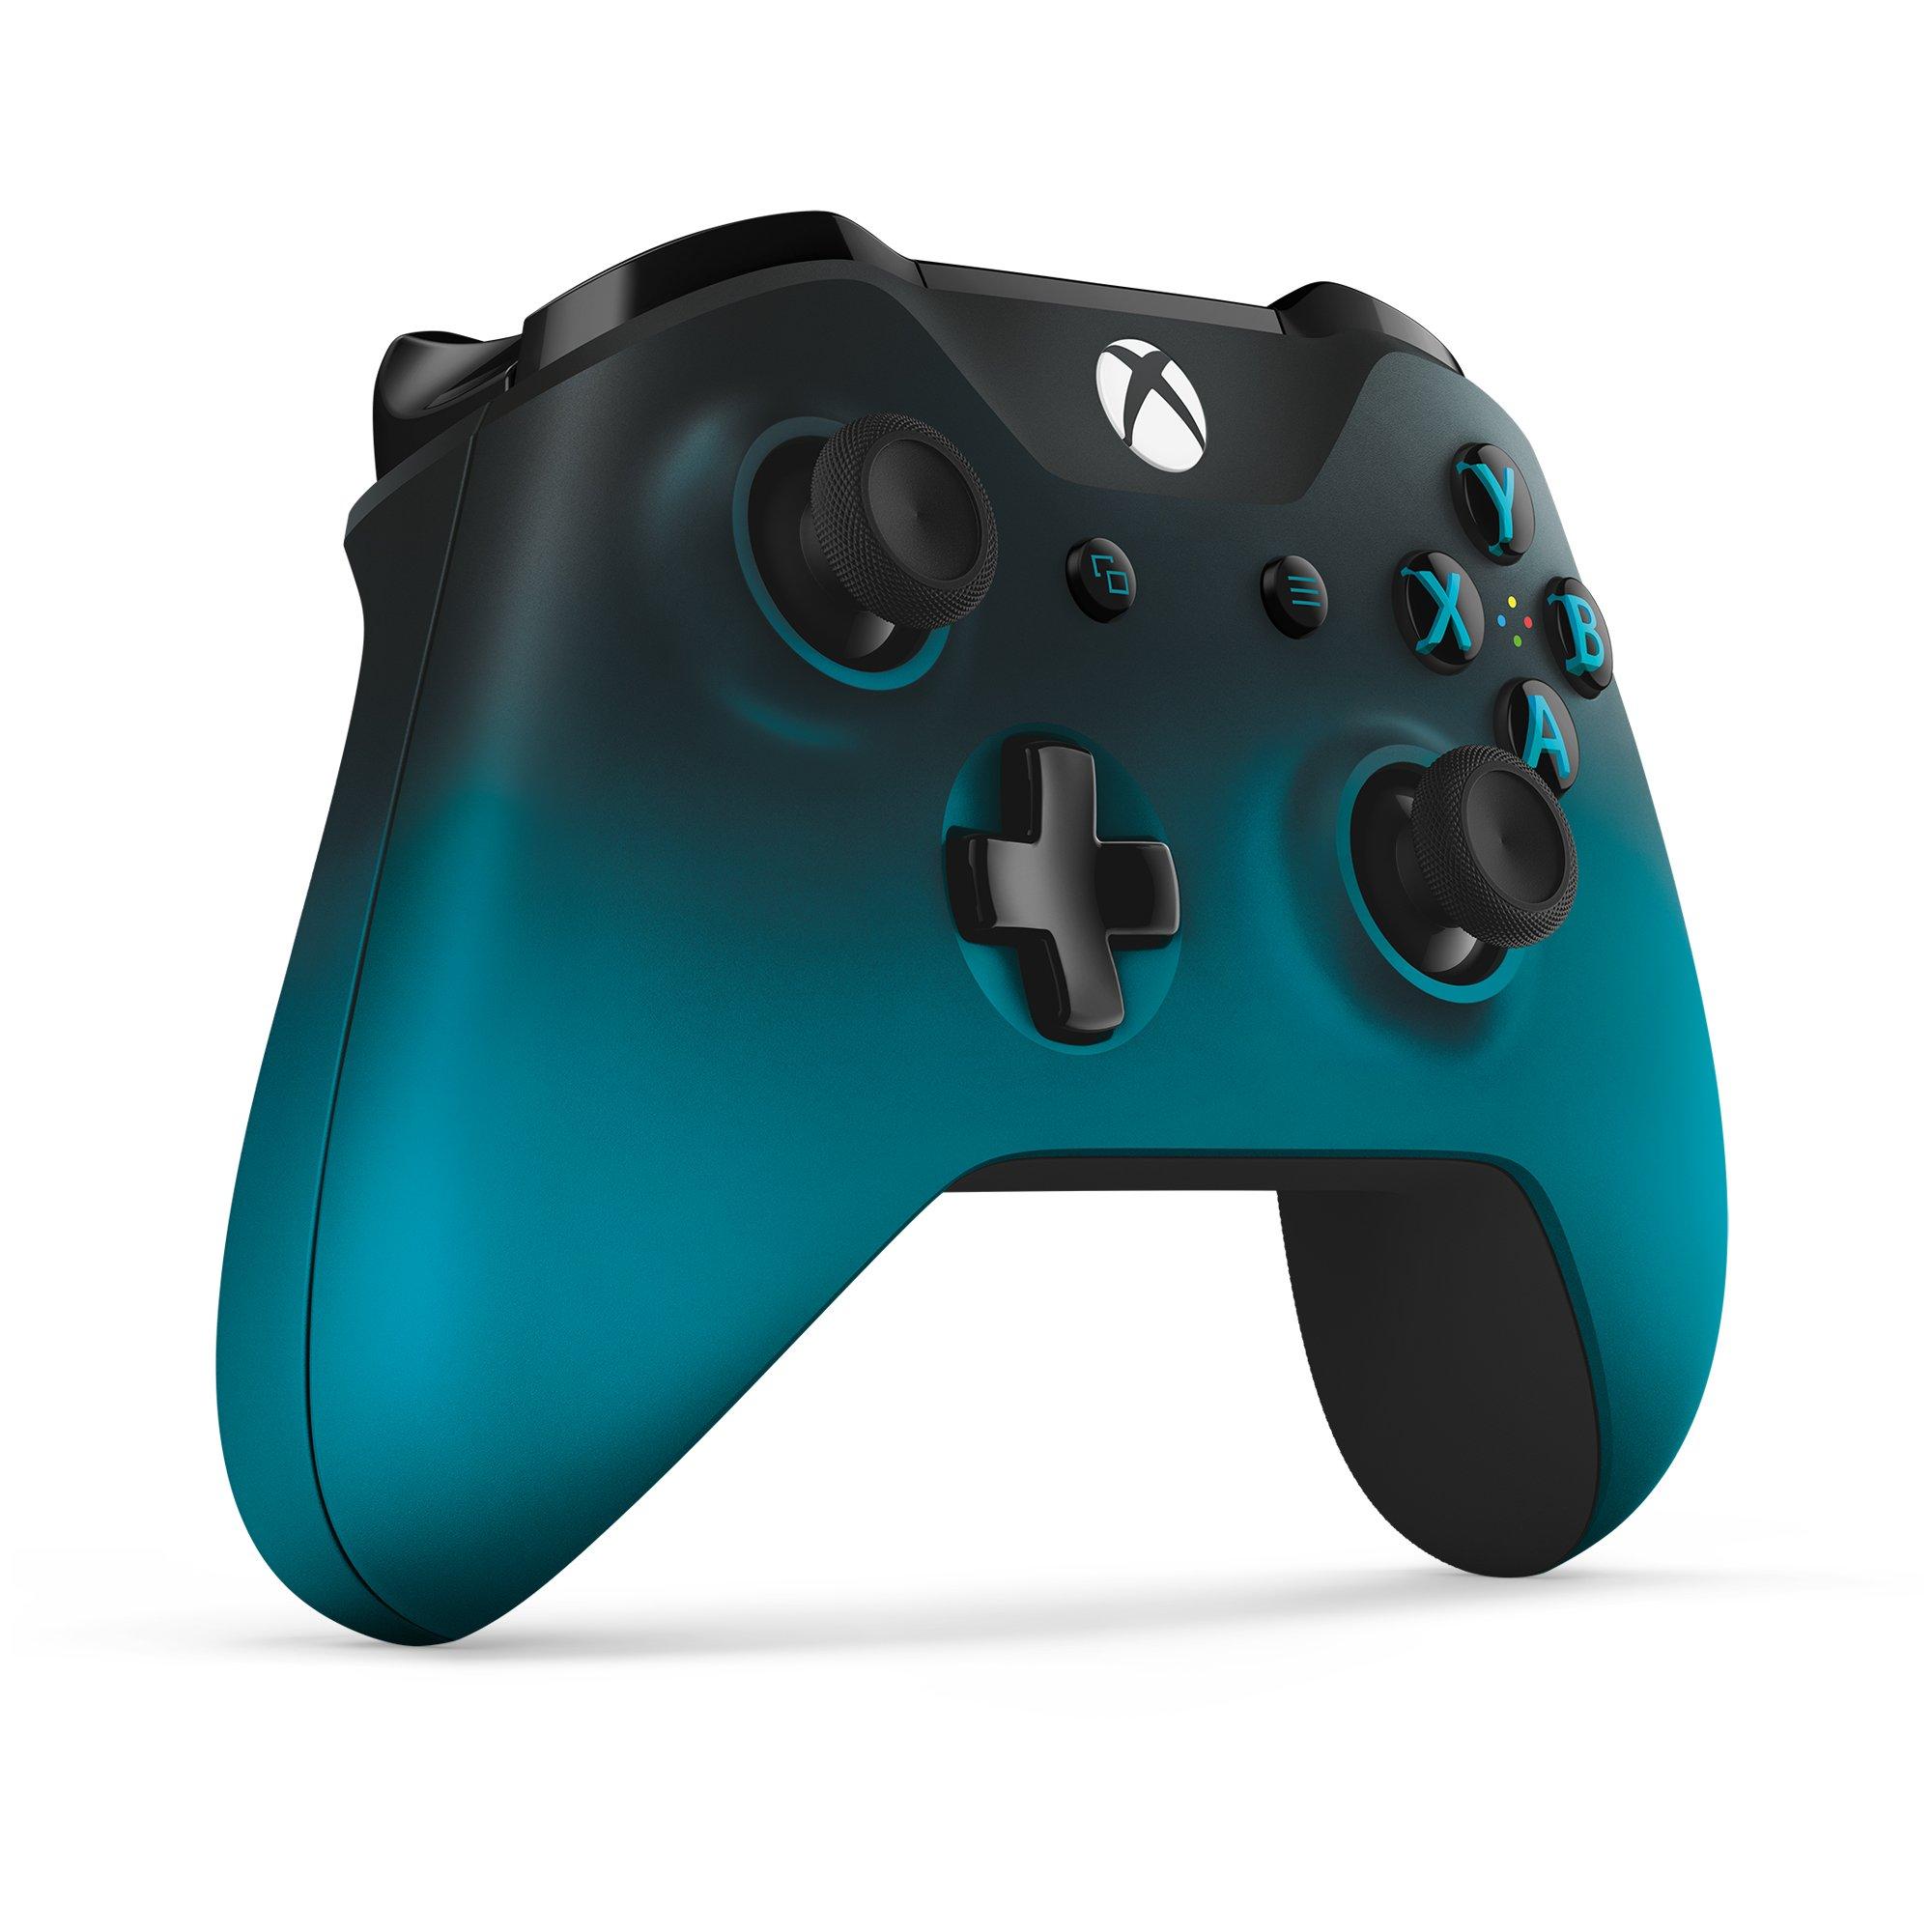 grey and light blue xbox controller